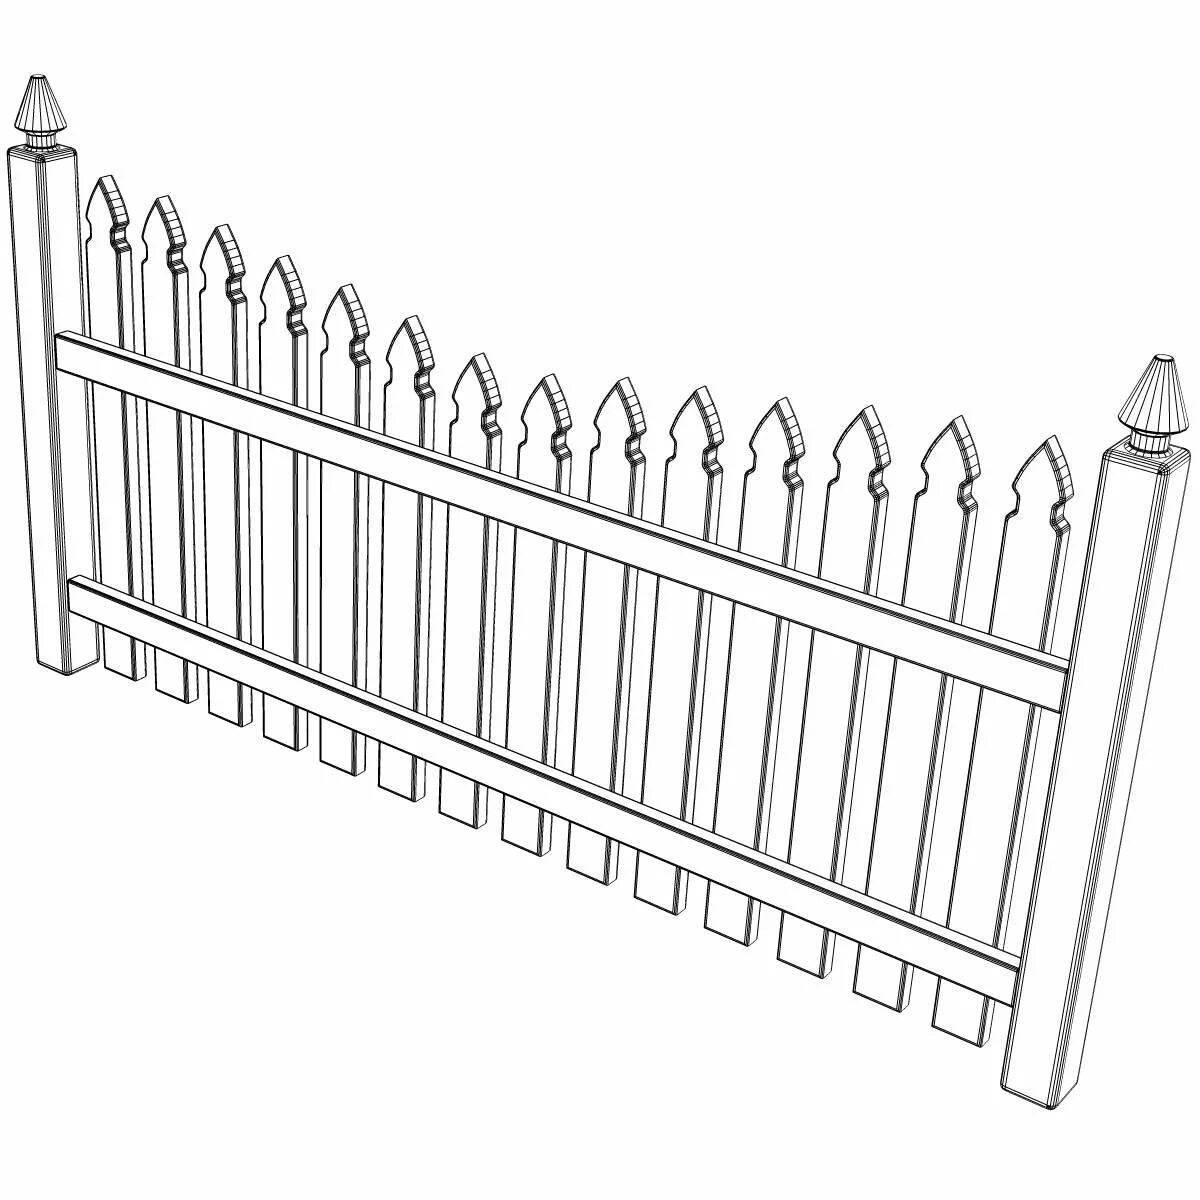 Splendorous fence coloring page for juniors